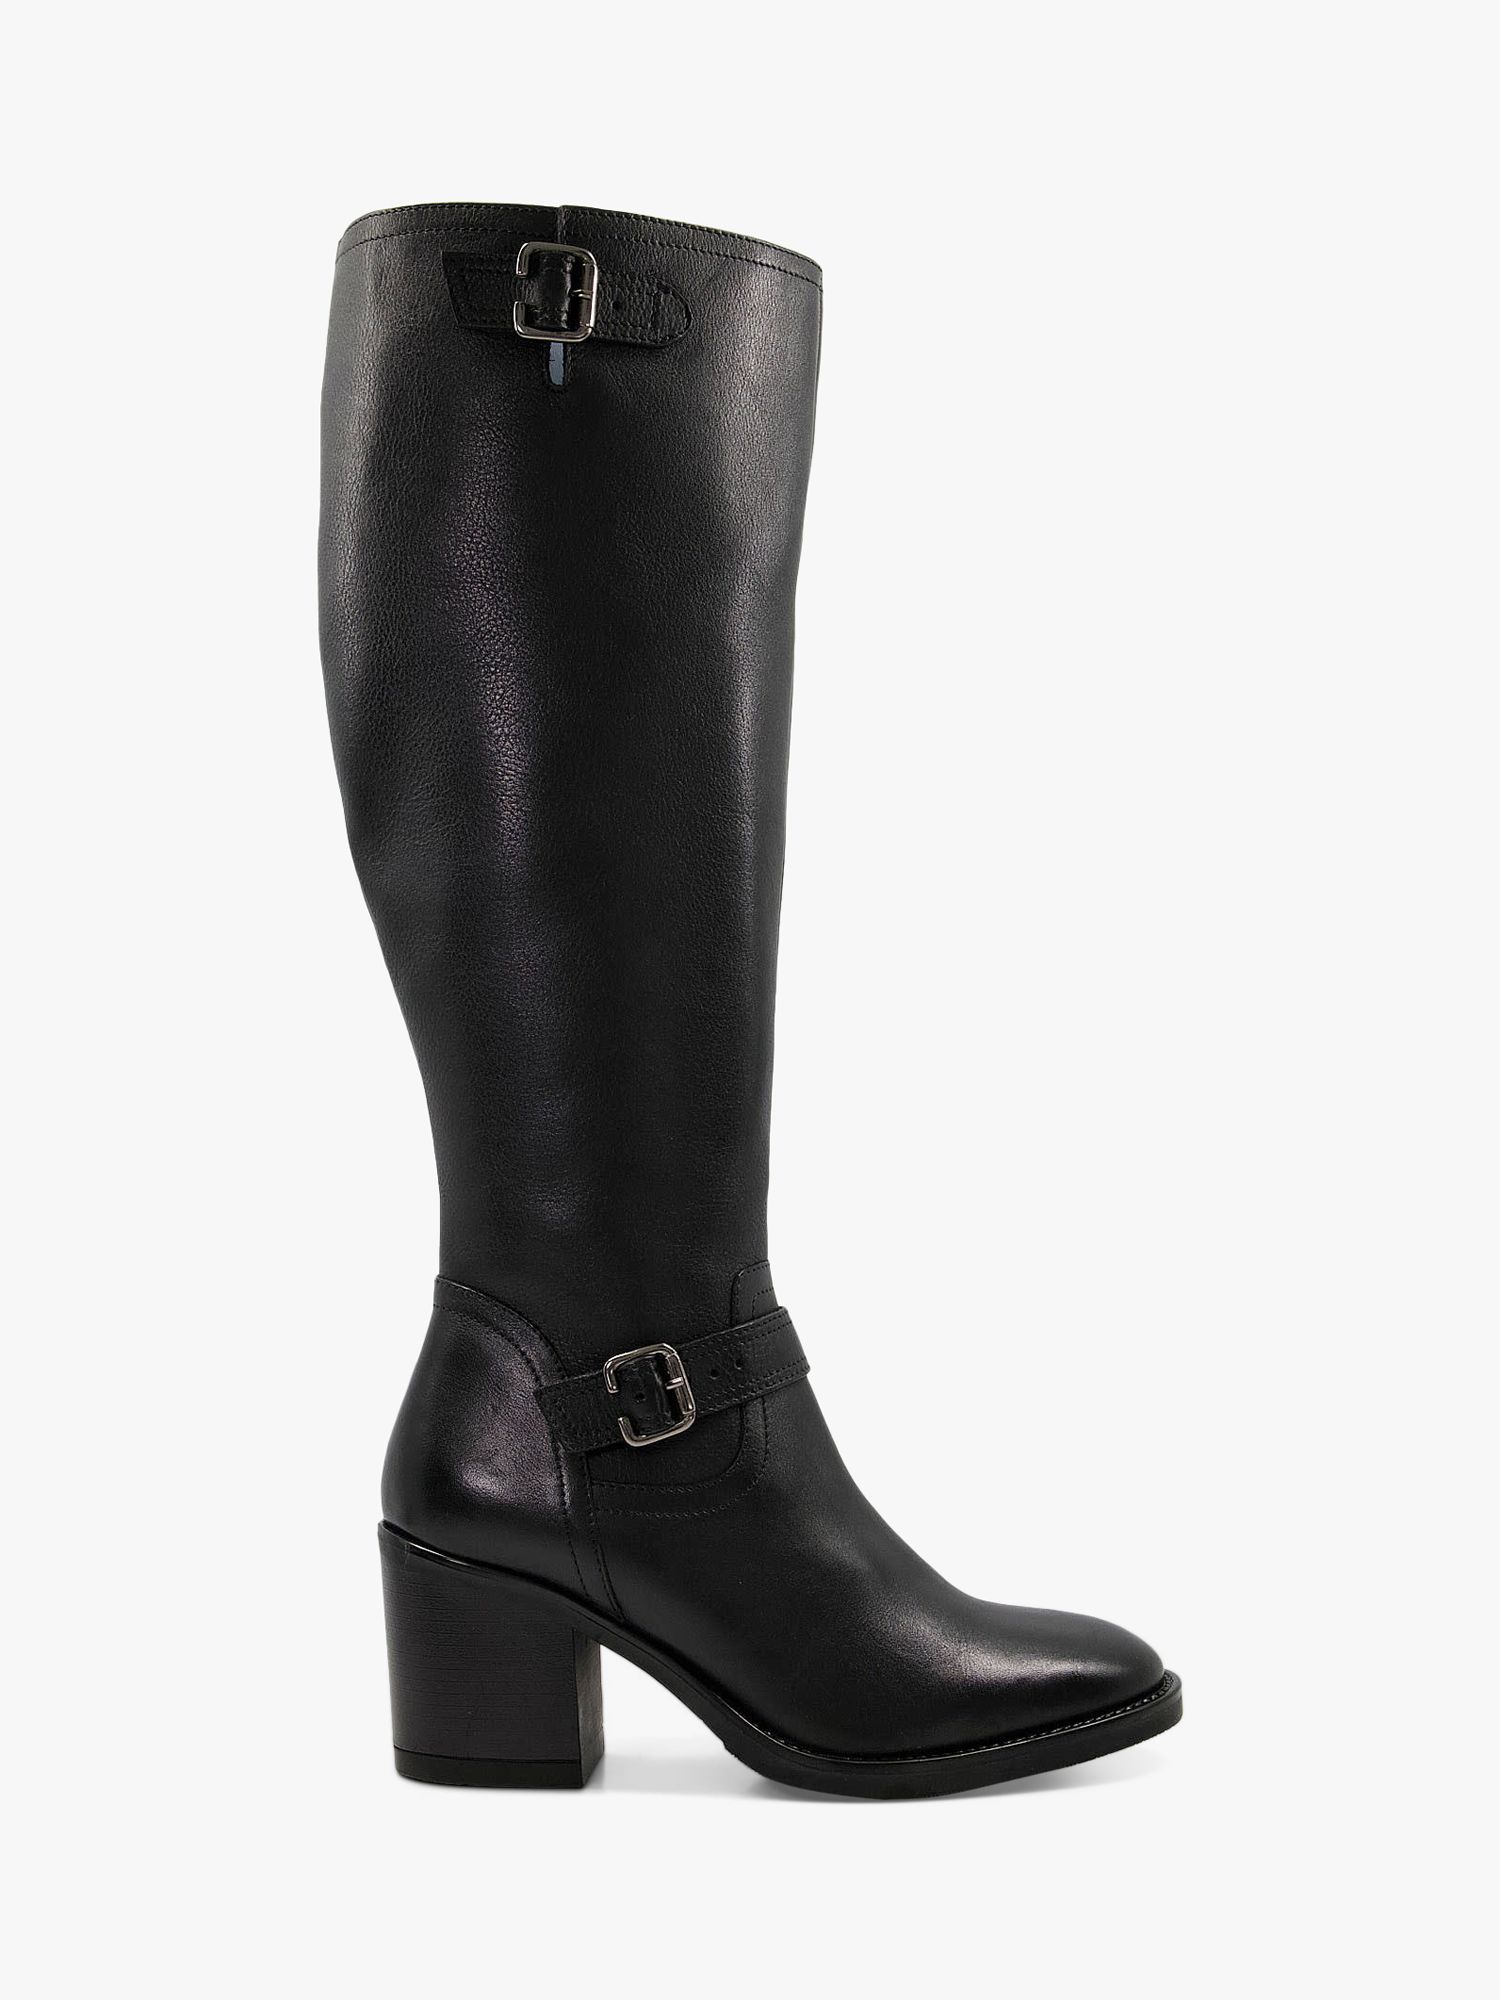 Dune Trelise Leather Knee High Boots, Black at John Lewis & Partners